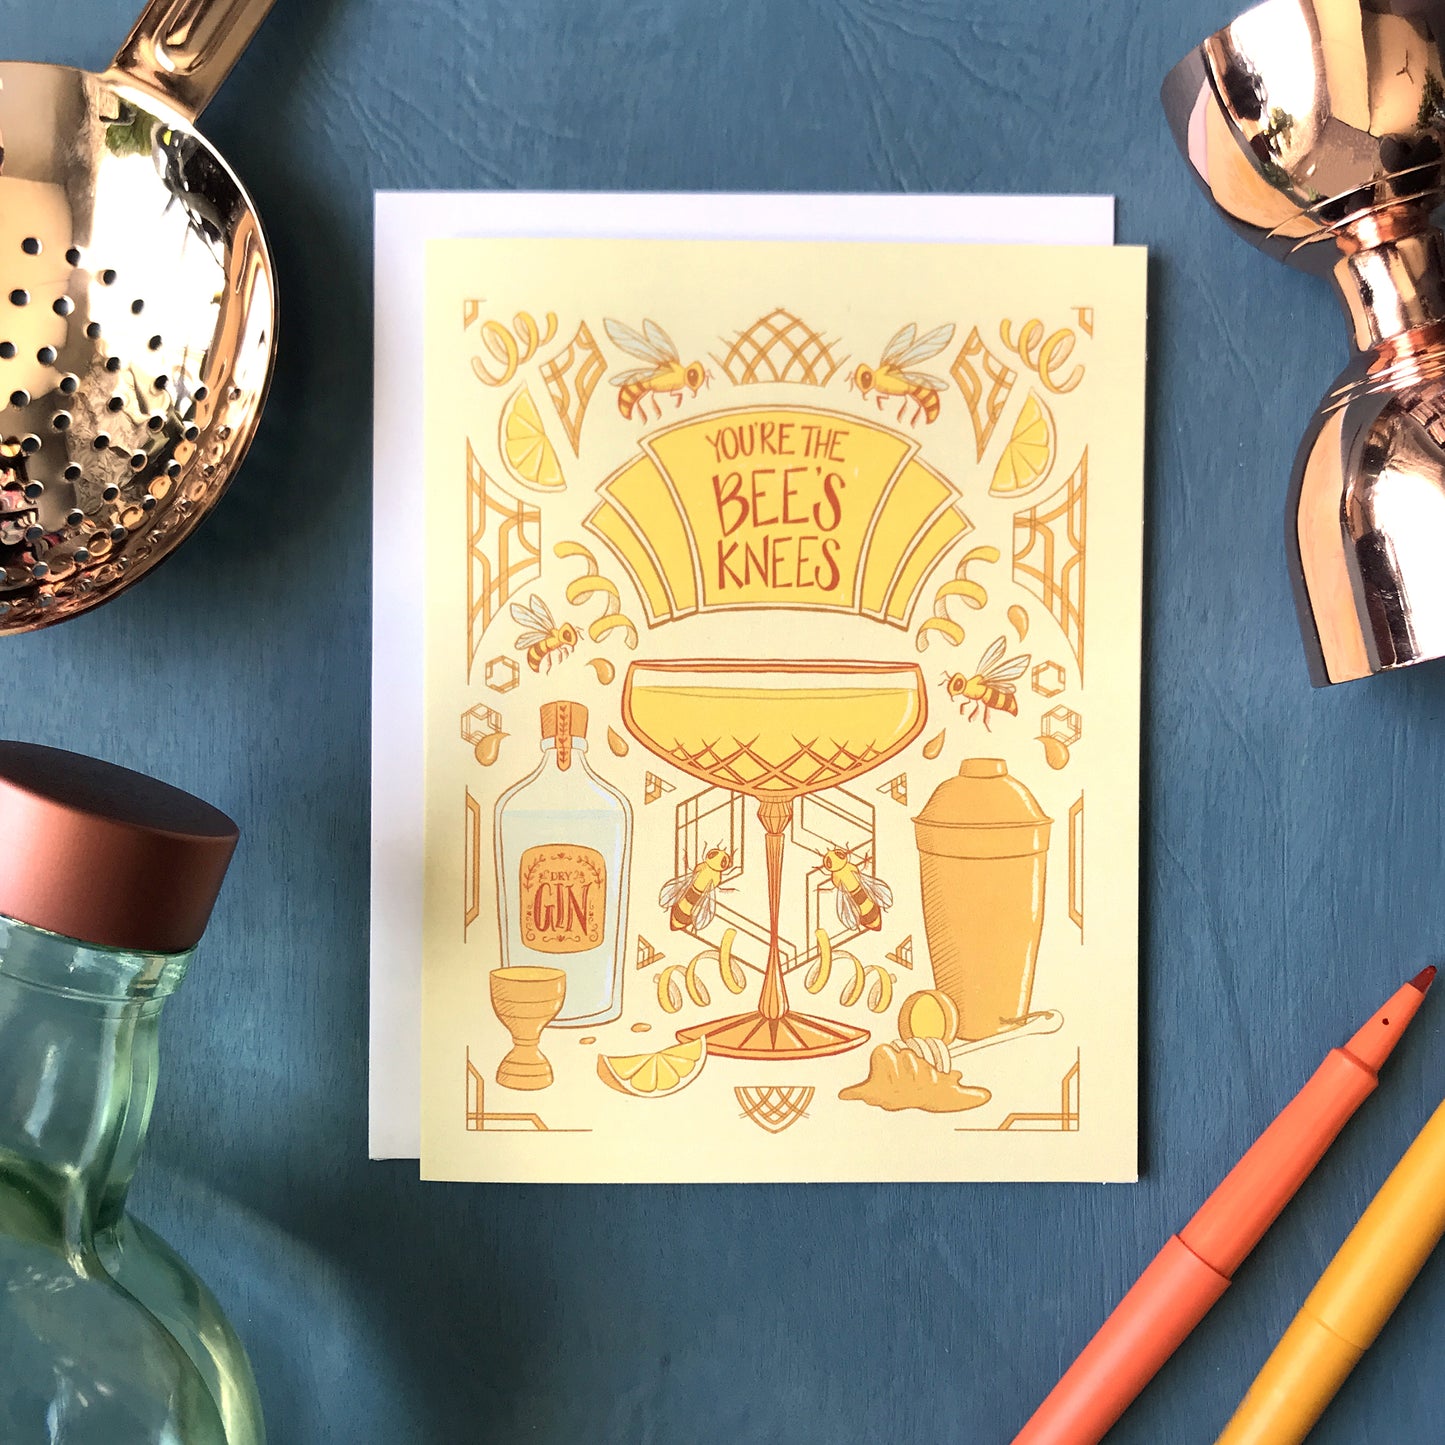 A yellow art-deco inspired greeting card is covered with illustrations of bees, honey and cocktail accessories, along with a crystal coupe filled with a Bee's Knees cocktail. A marquee on the card reads "You're the Bee's Knees" in dark orange letters. The card is surrounded by a bottle of Plymouth gin, a copper julep strainer and bell jigger, and felt tip pens on a blue wooden background.